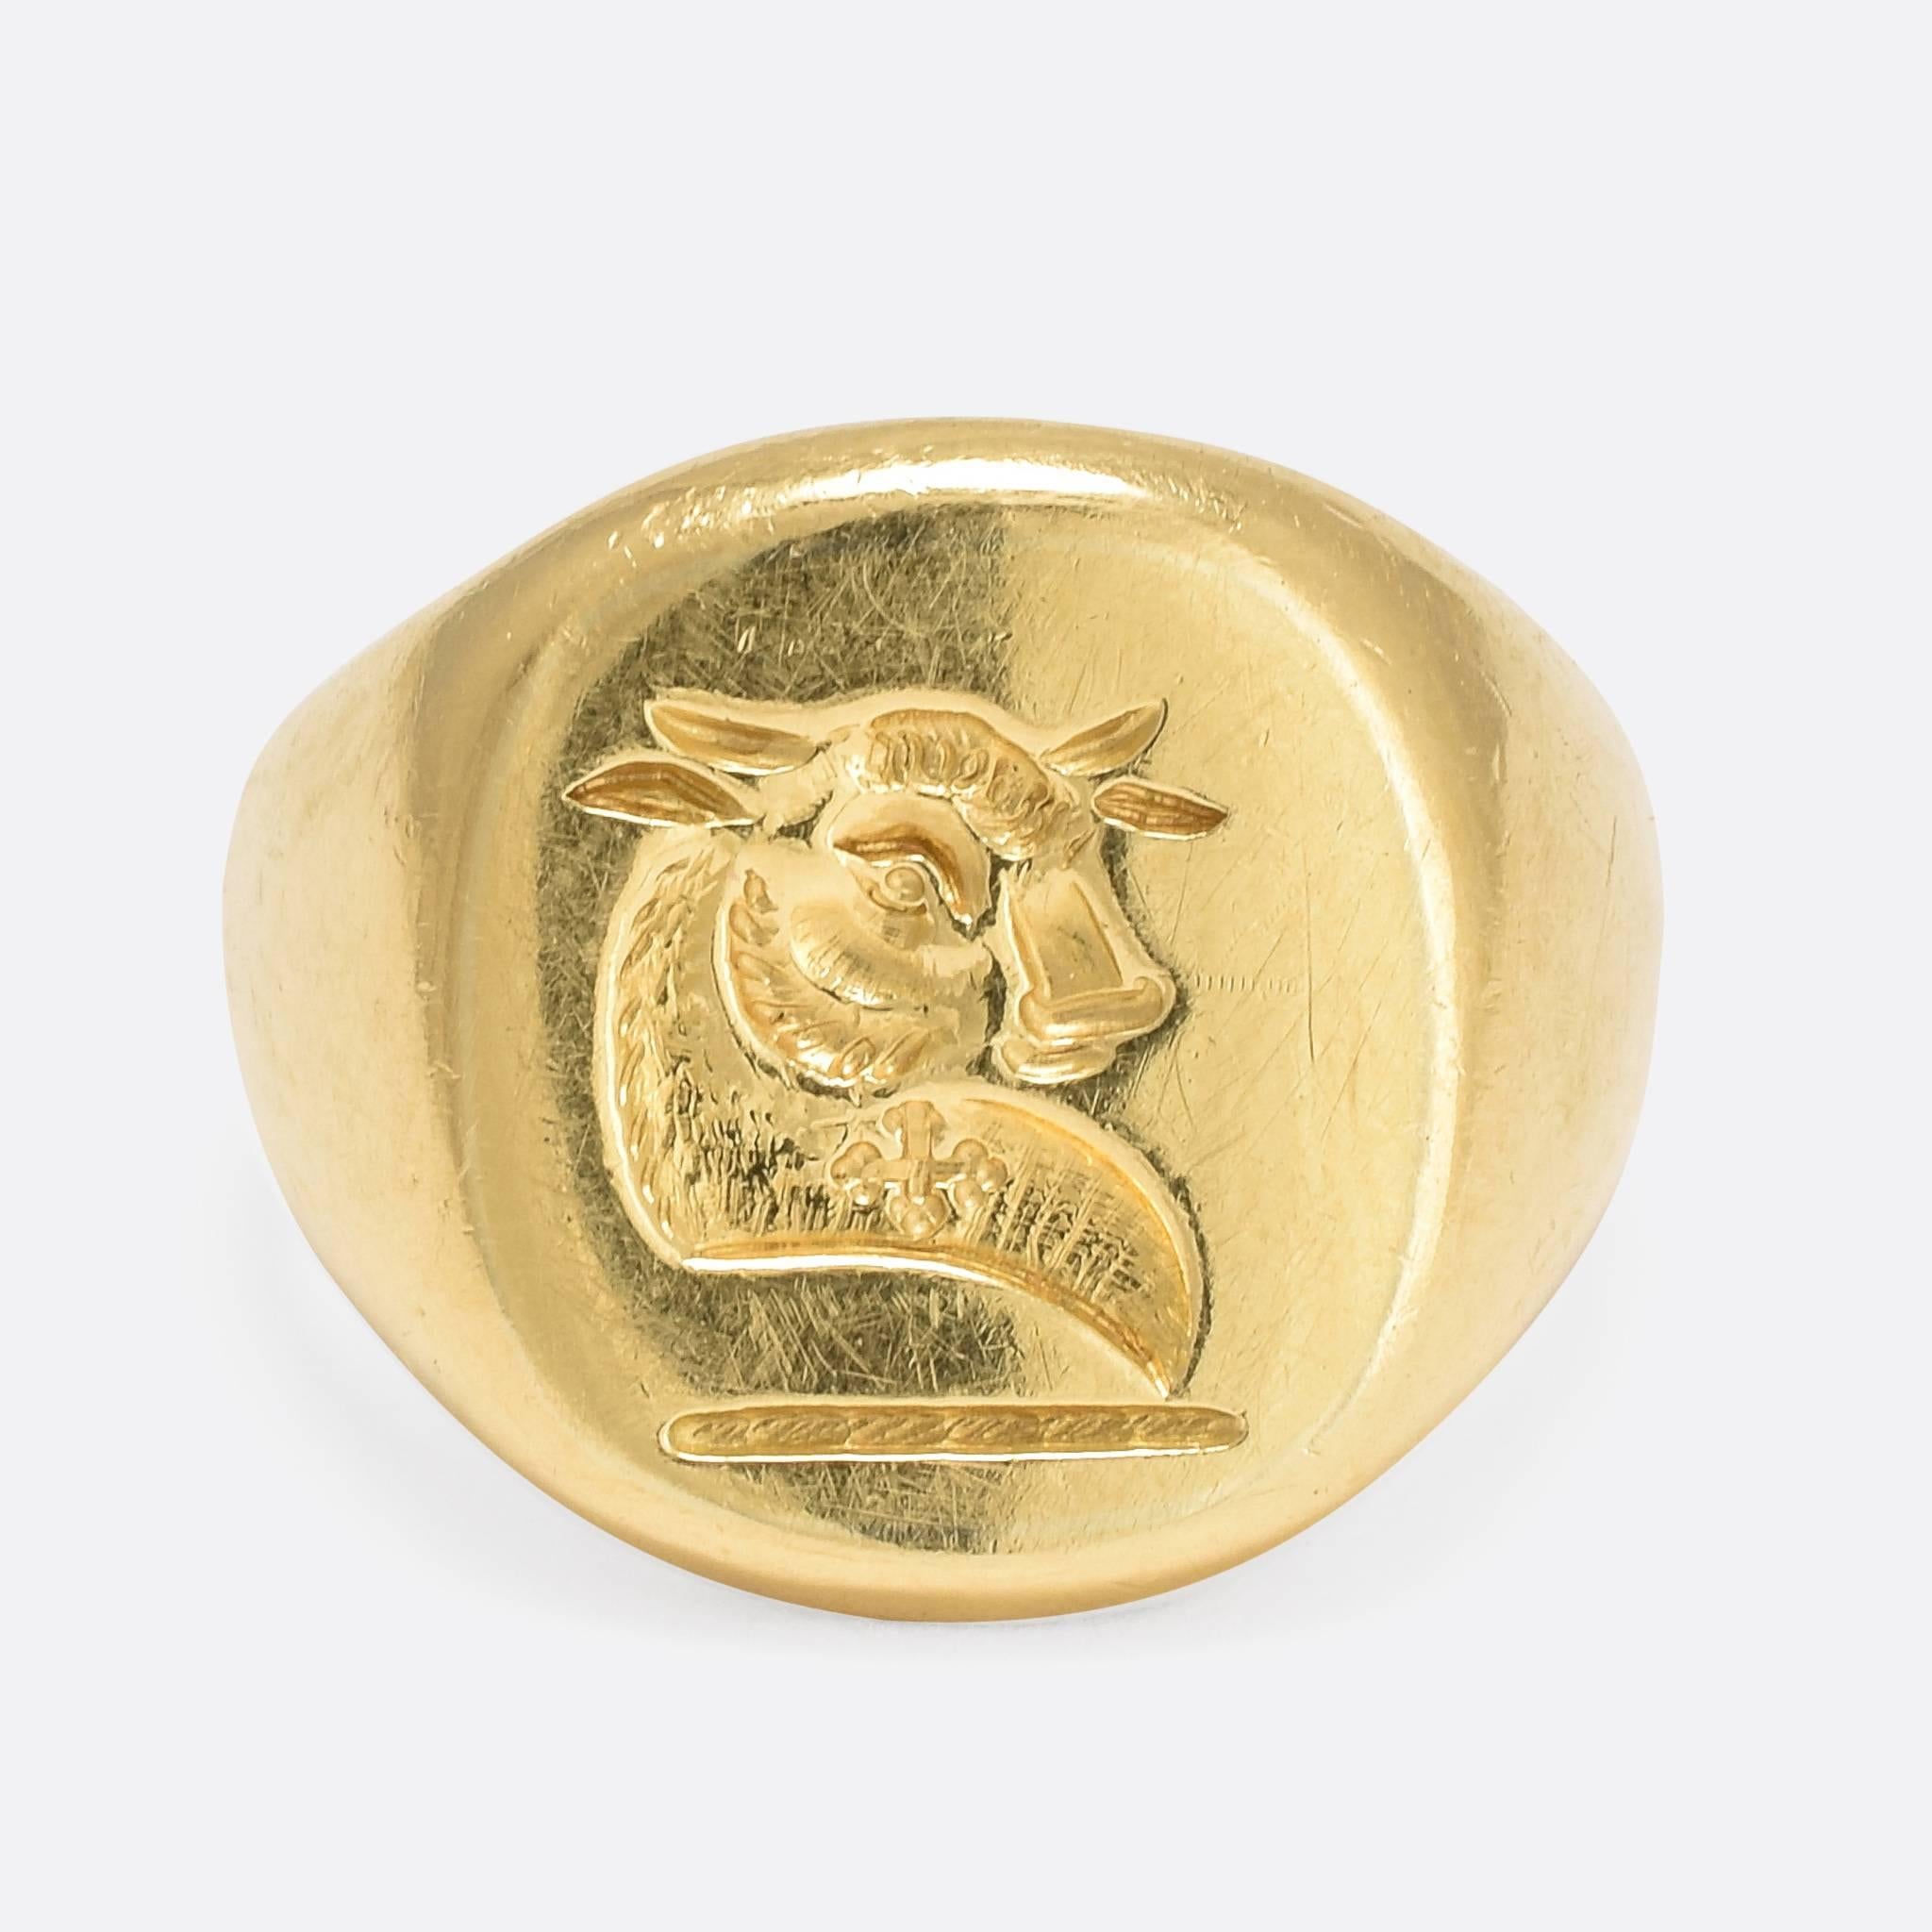 This superb vintage signet ring is carved with a heraldic intaglio crest: depicting a bull with quatrefoil. This incarnation of the bull was adopted by many families, including: Archer, Clud, Hunter, Stark, and Turnbull. It's modelled in 18ct yellow